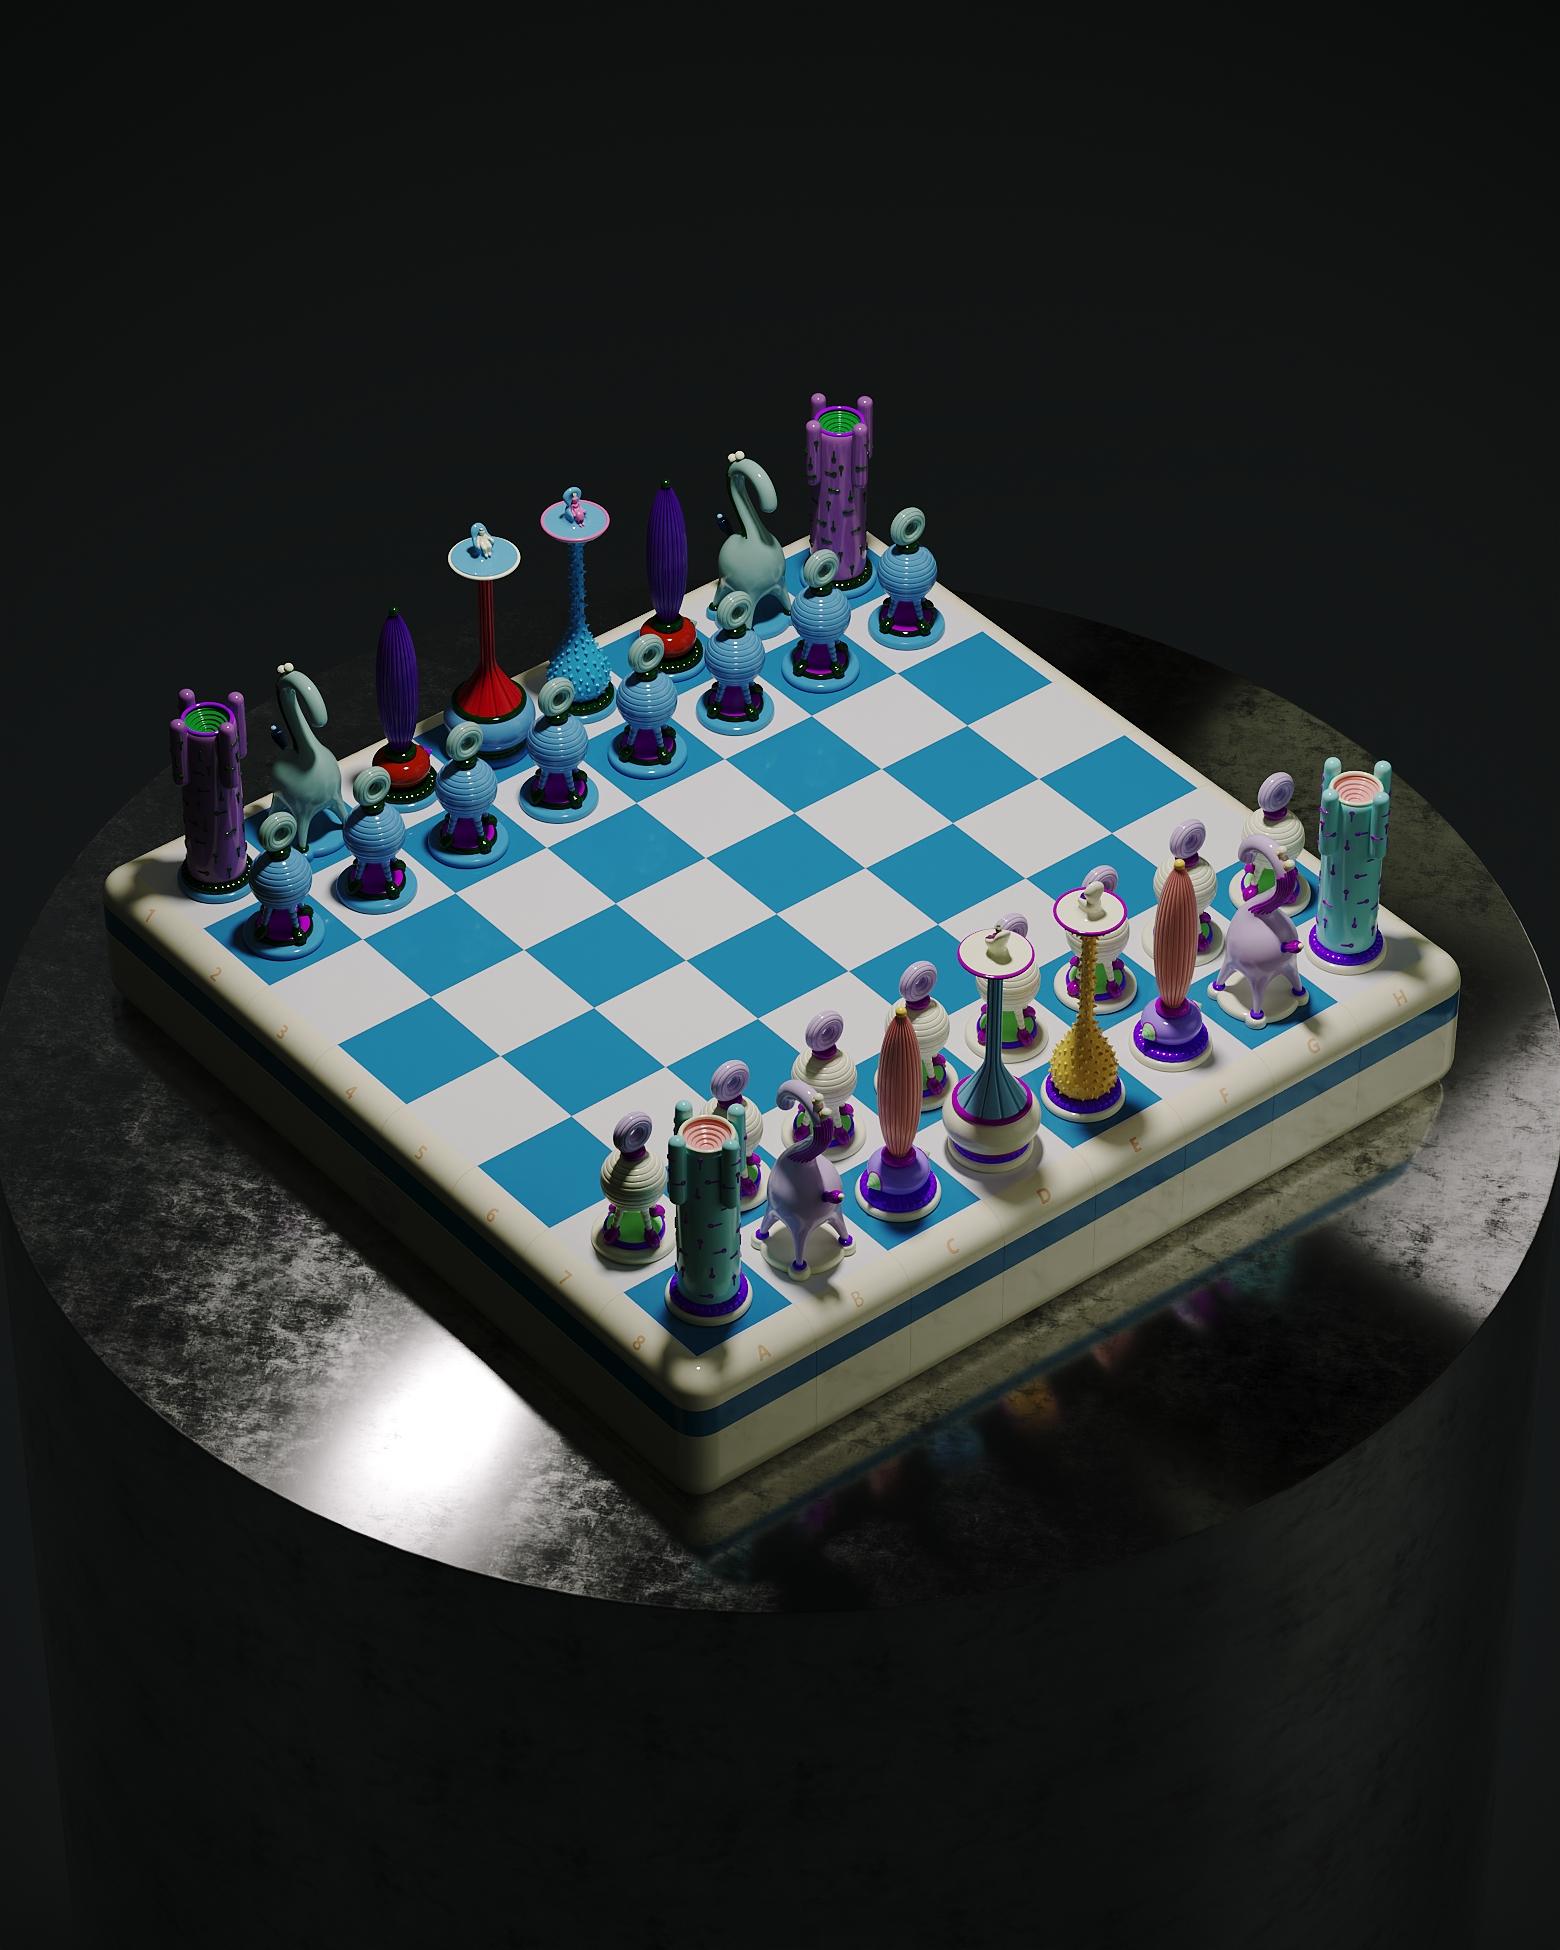 Another Kingdom Chess Set by Taras Yoom
Limited Edition of 21
Dimensions: D 45 x W 45 x H 8 cm
Materials: Metal, plastic, acrylic, wood, silicone.

Chess set “Another Kingdom: Light Stage”, that embodies a new stage in life — a truce. In this new